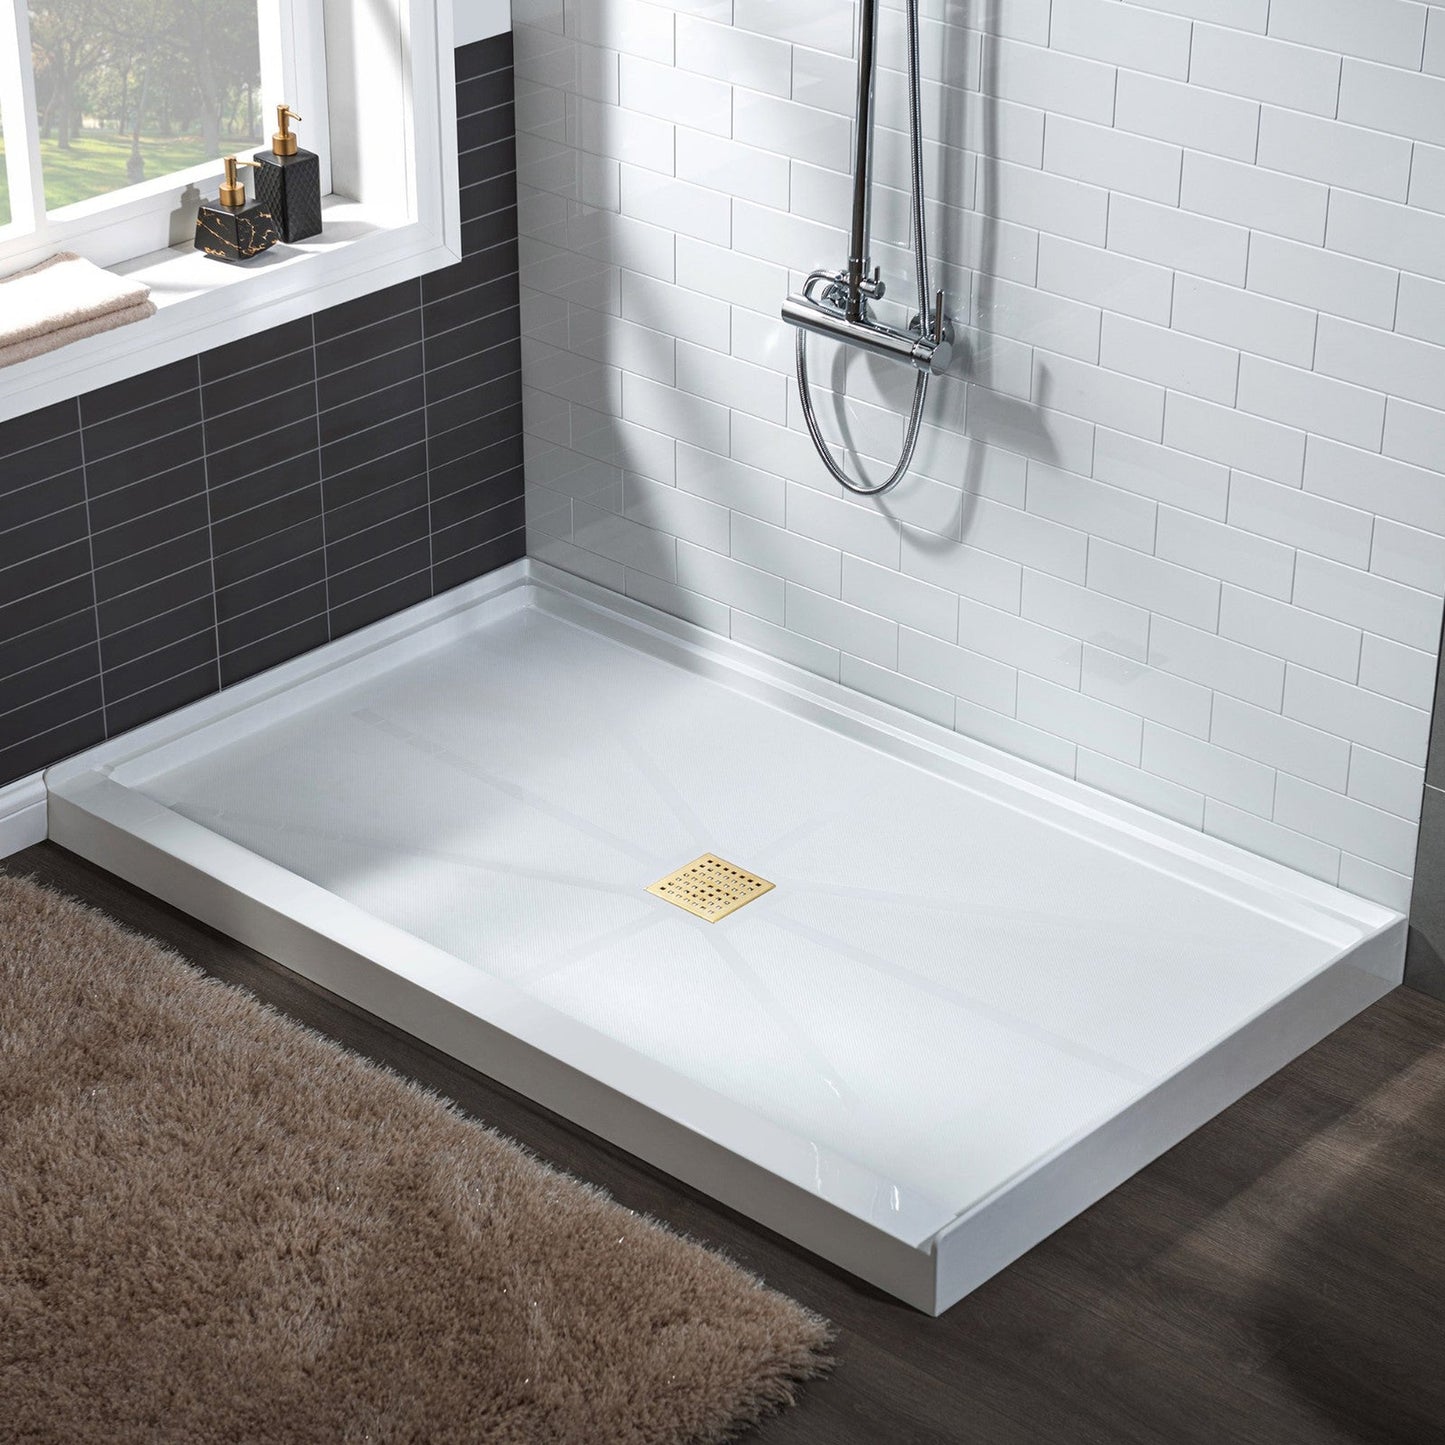 WoodBridge 60" x 36" White Solid Surface Shower Base Center Drain Location With Brushed Gold Trench Drain Cover